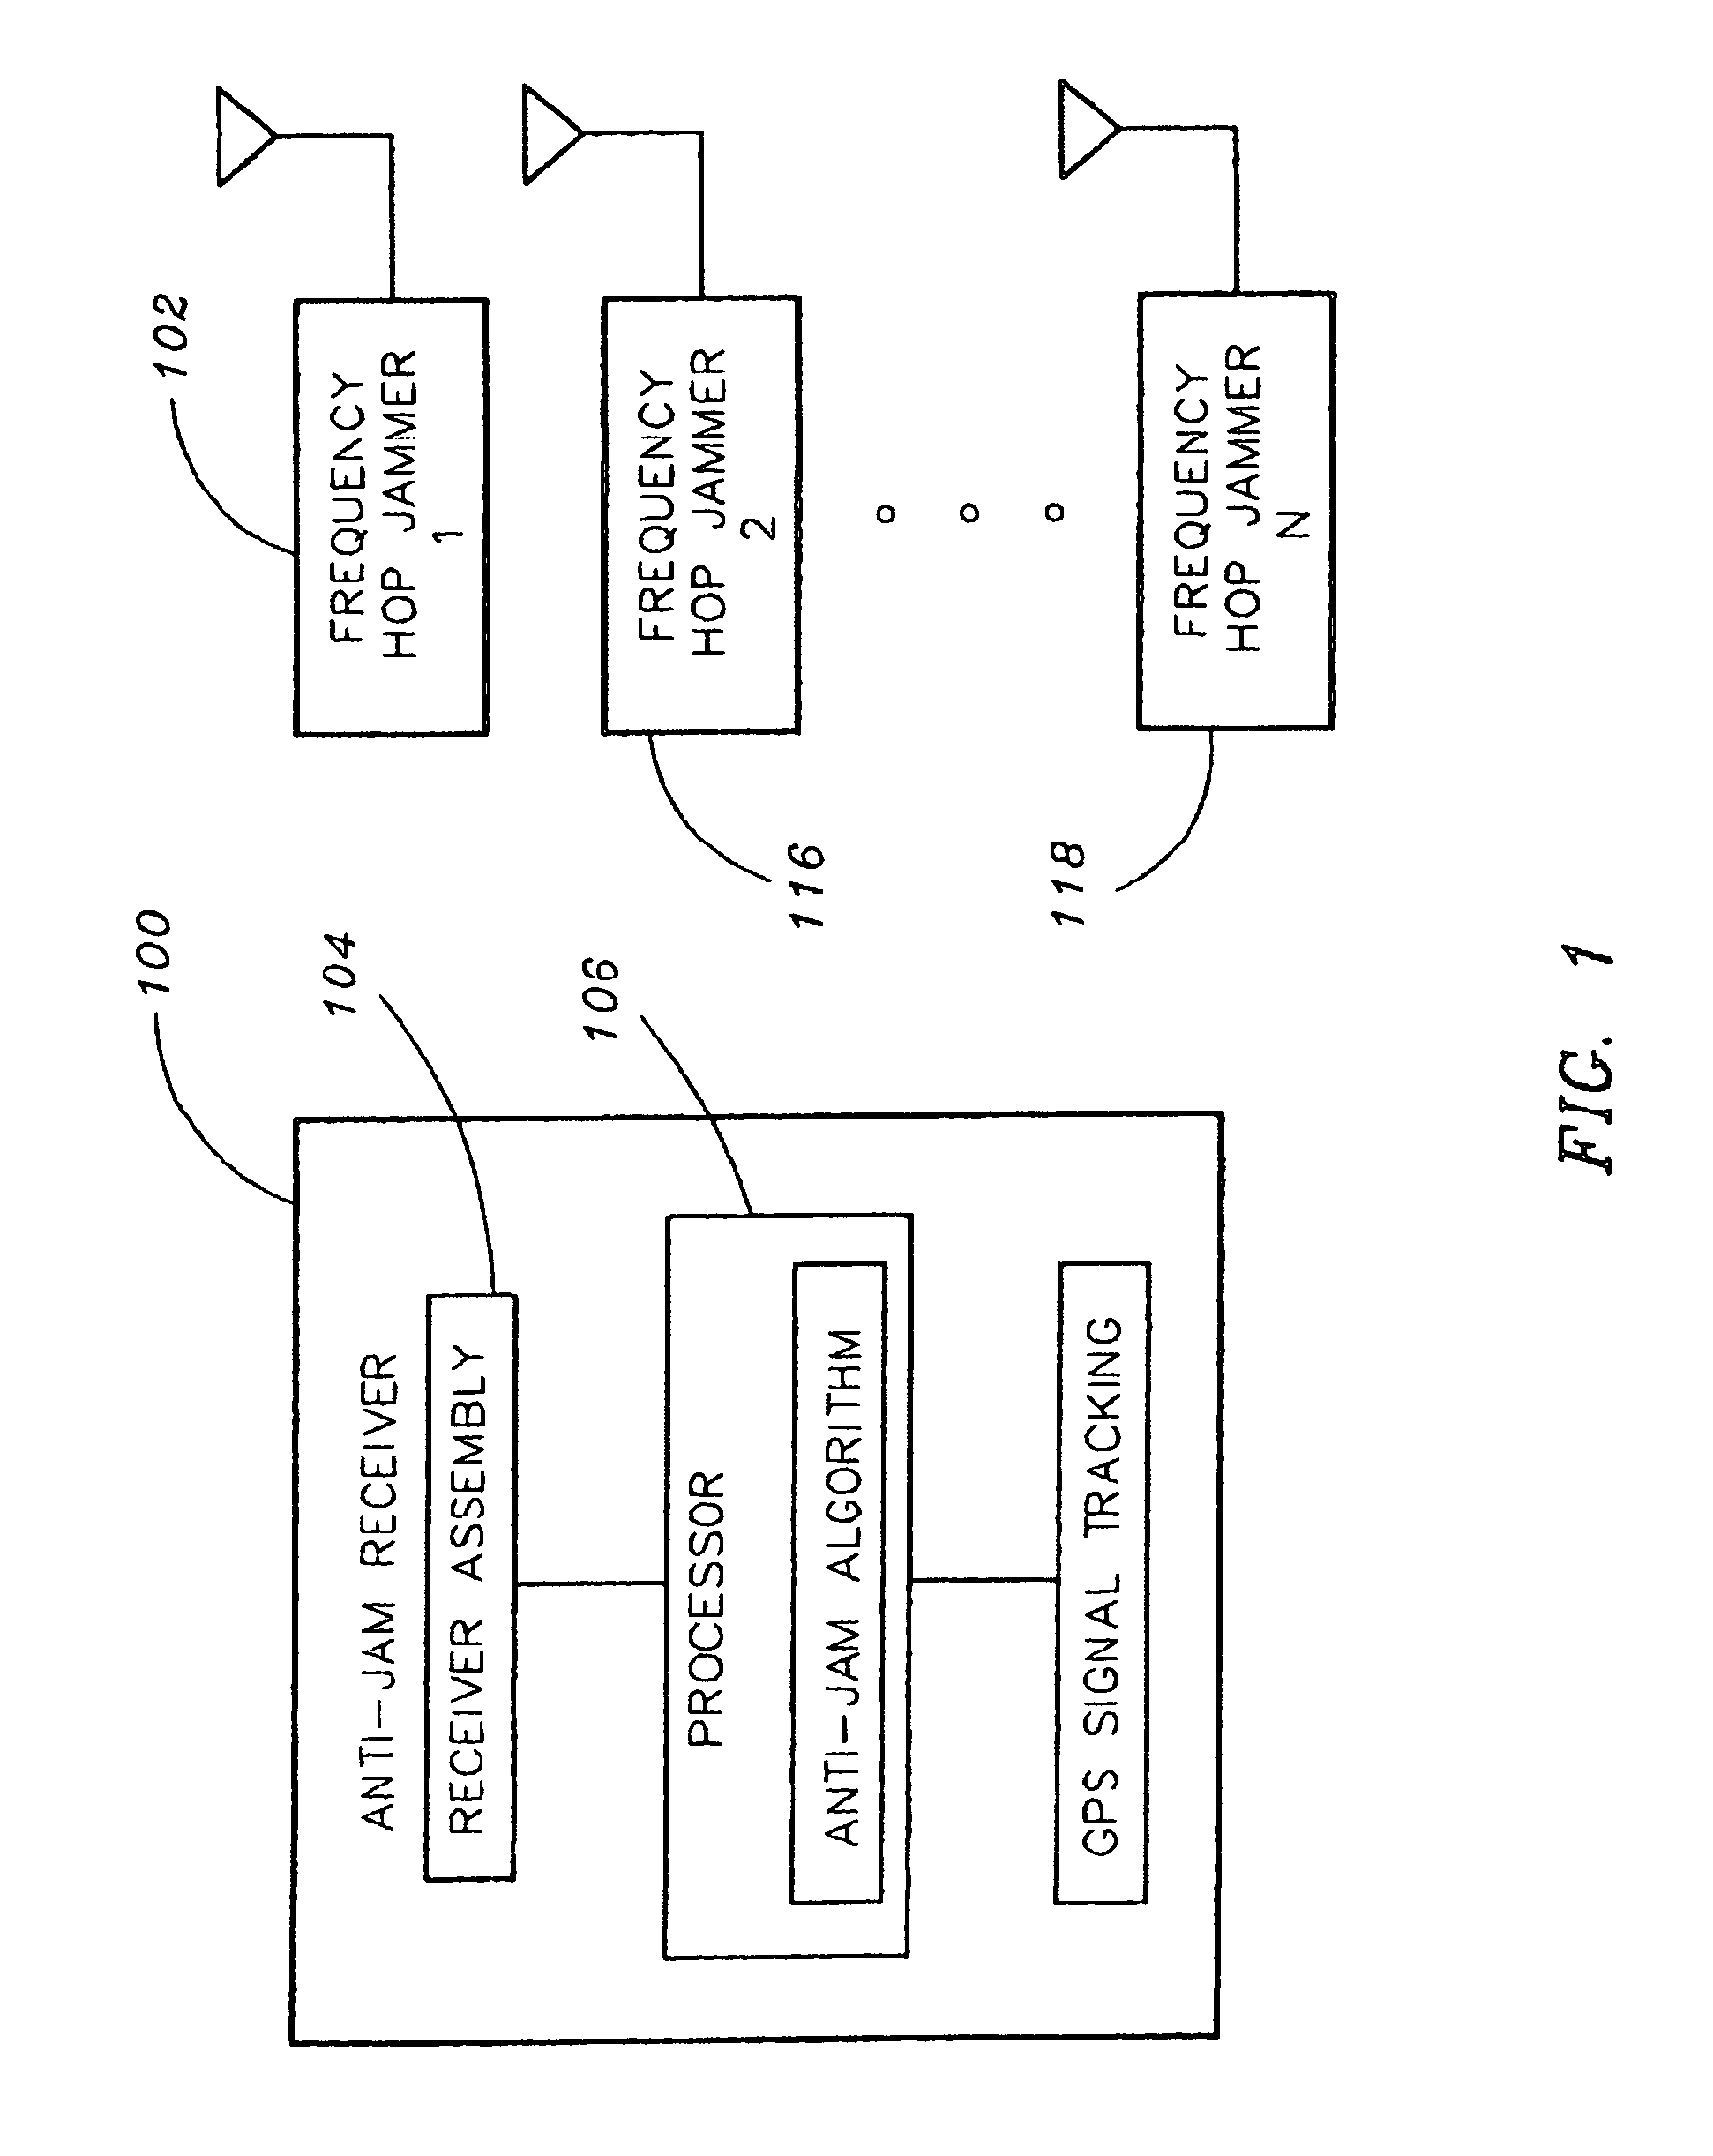 Coordinated frequency hop jamming and GPS anti-jam receiver